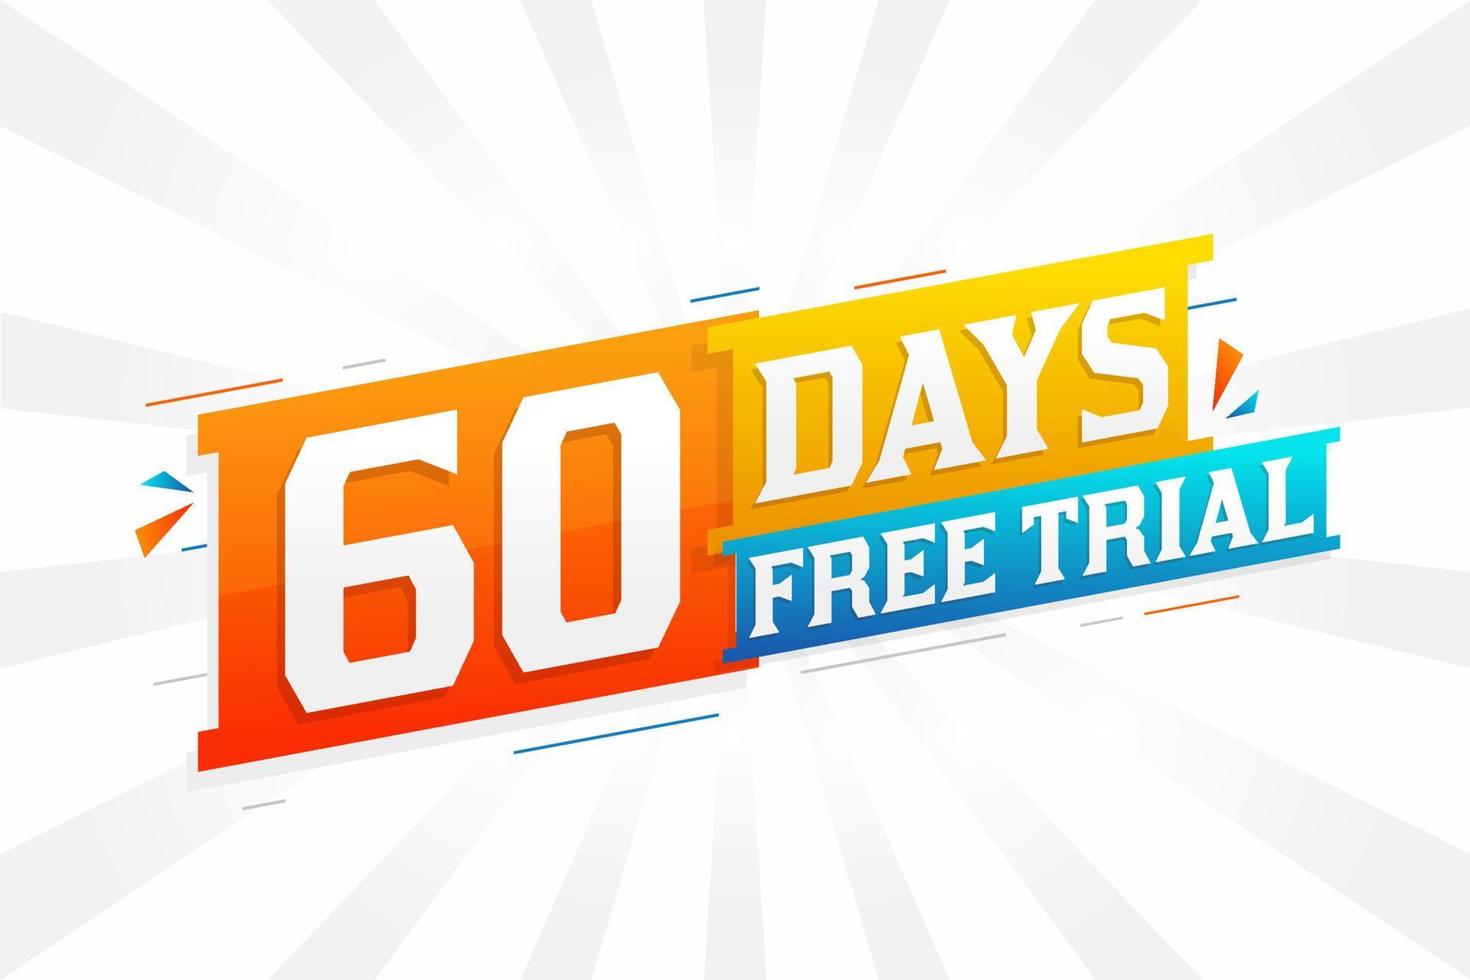 60 Days free Trial promotional bold text stock vector